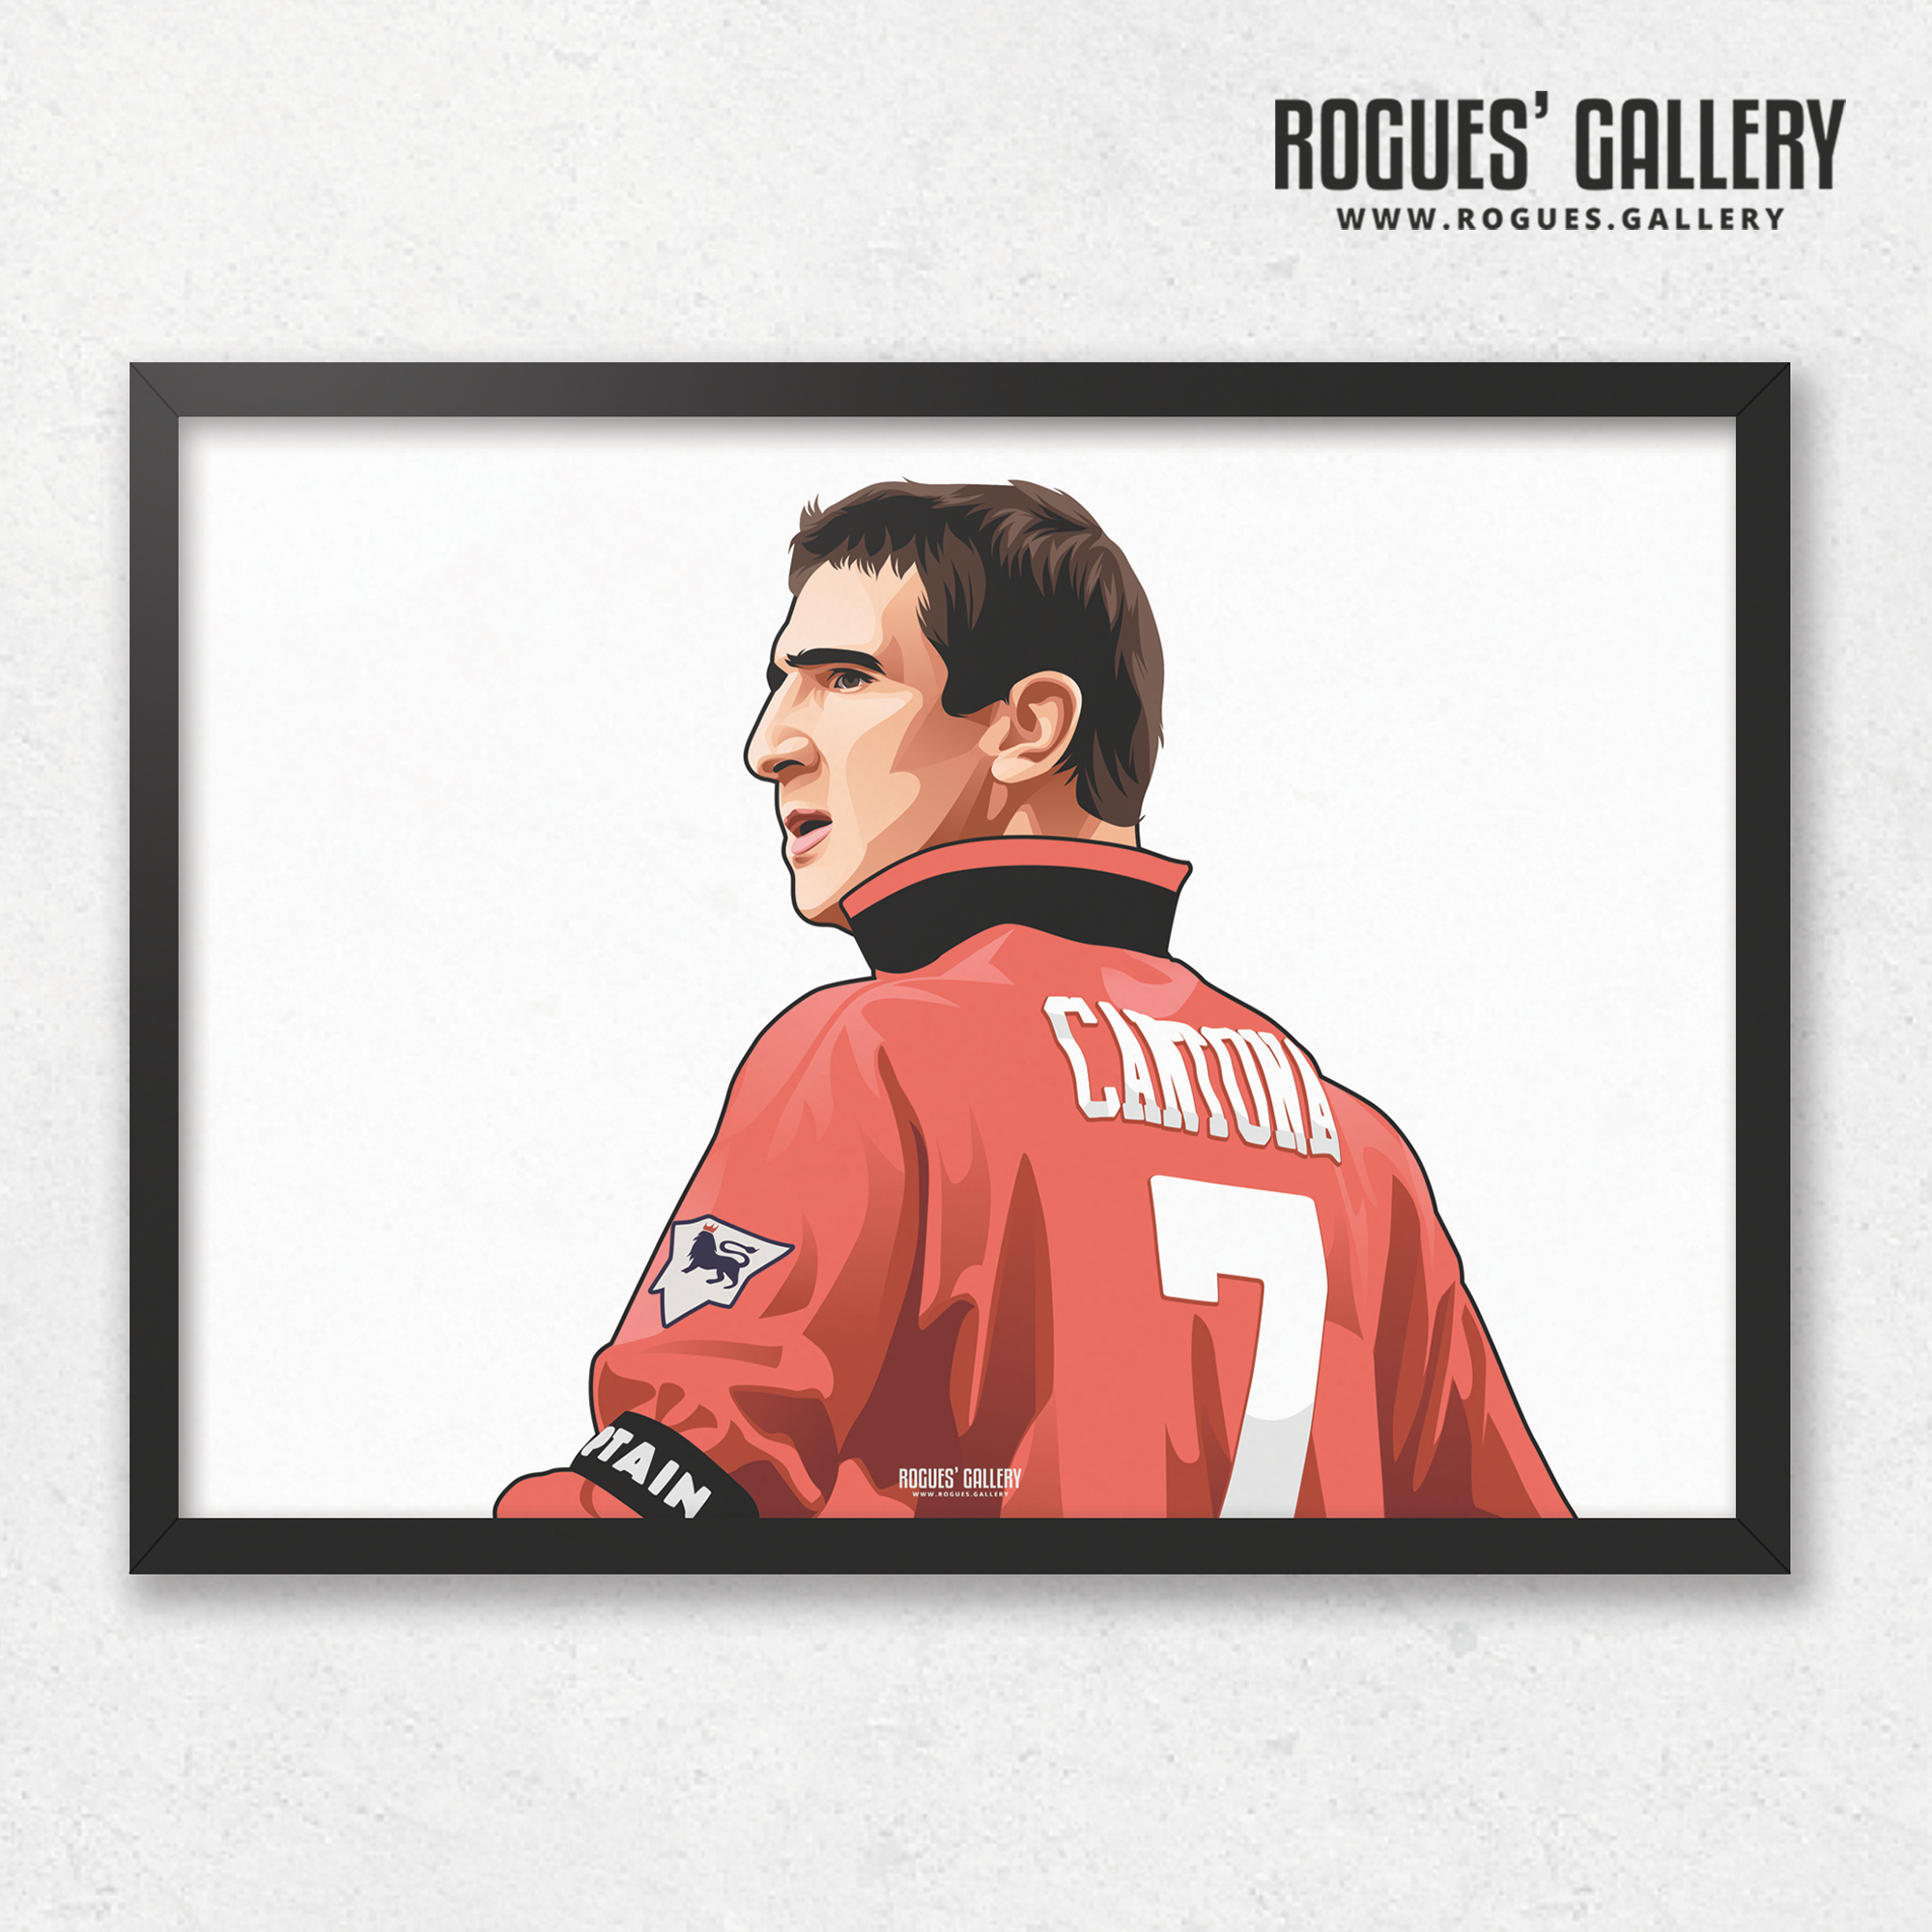 Eric Cantona Manchester United legend A3 print old Trafford Red Devils 